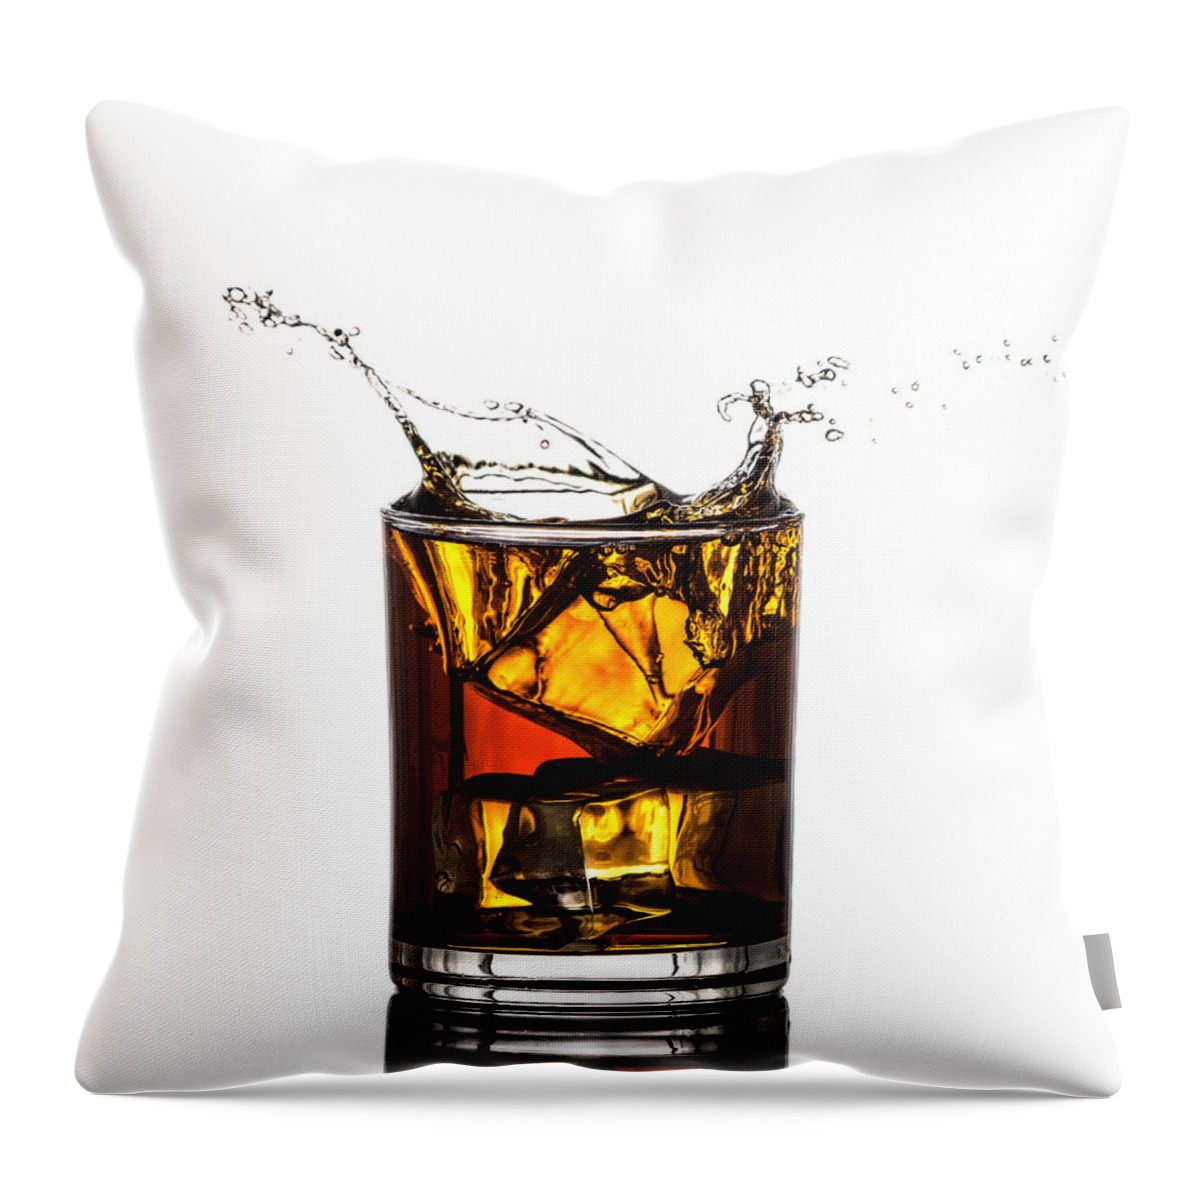 Splash Throw Pillow featuring the photograph Splash by Paulo Goncalves